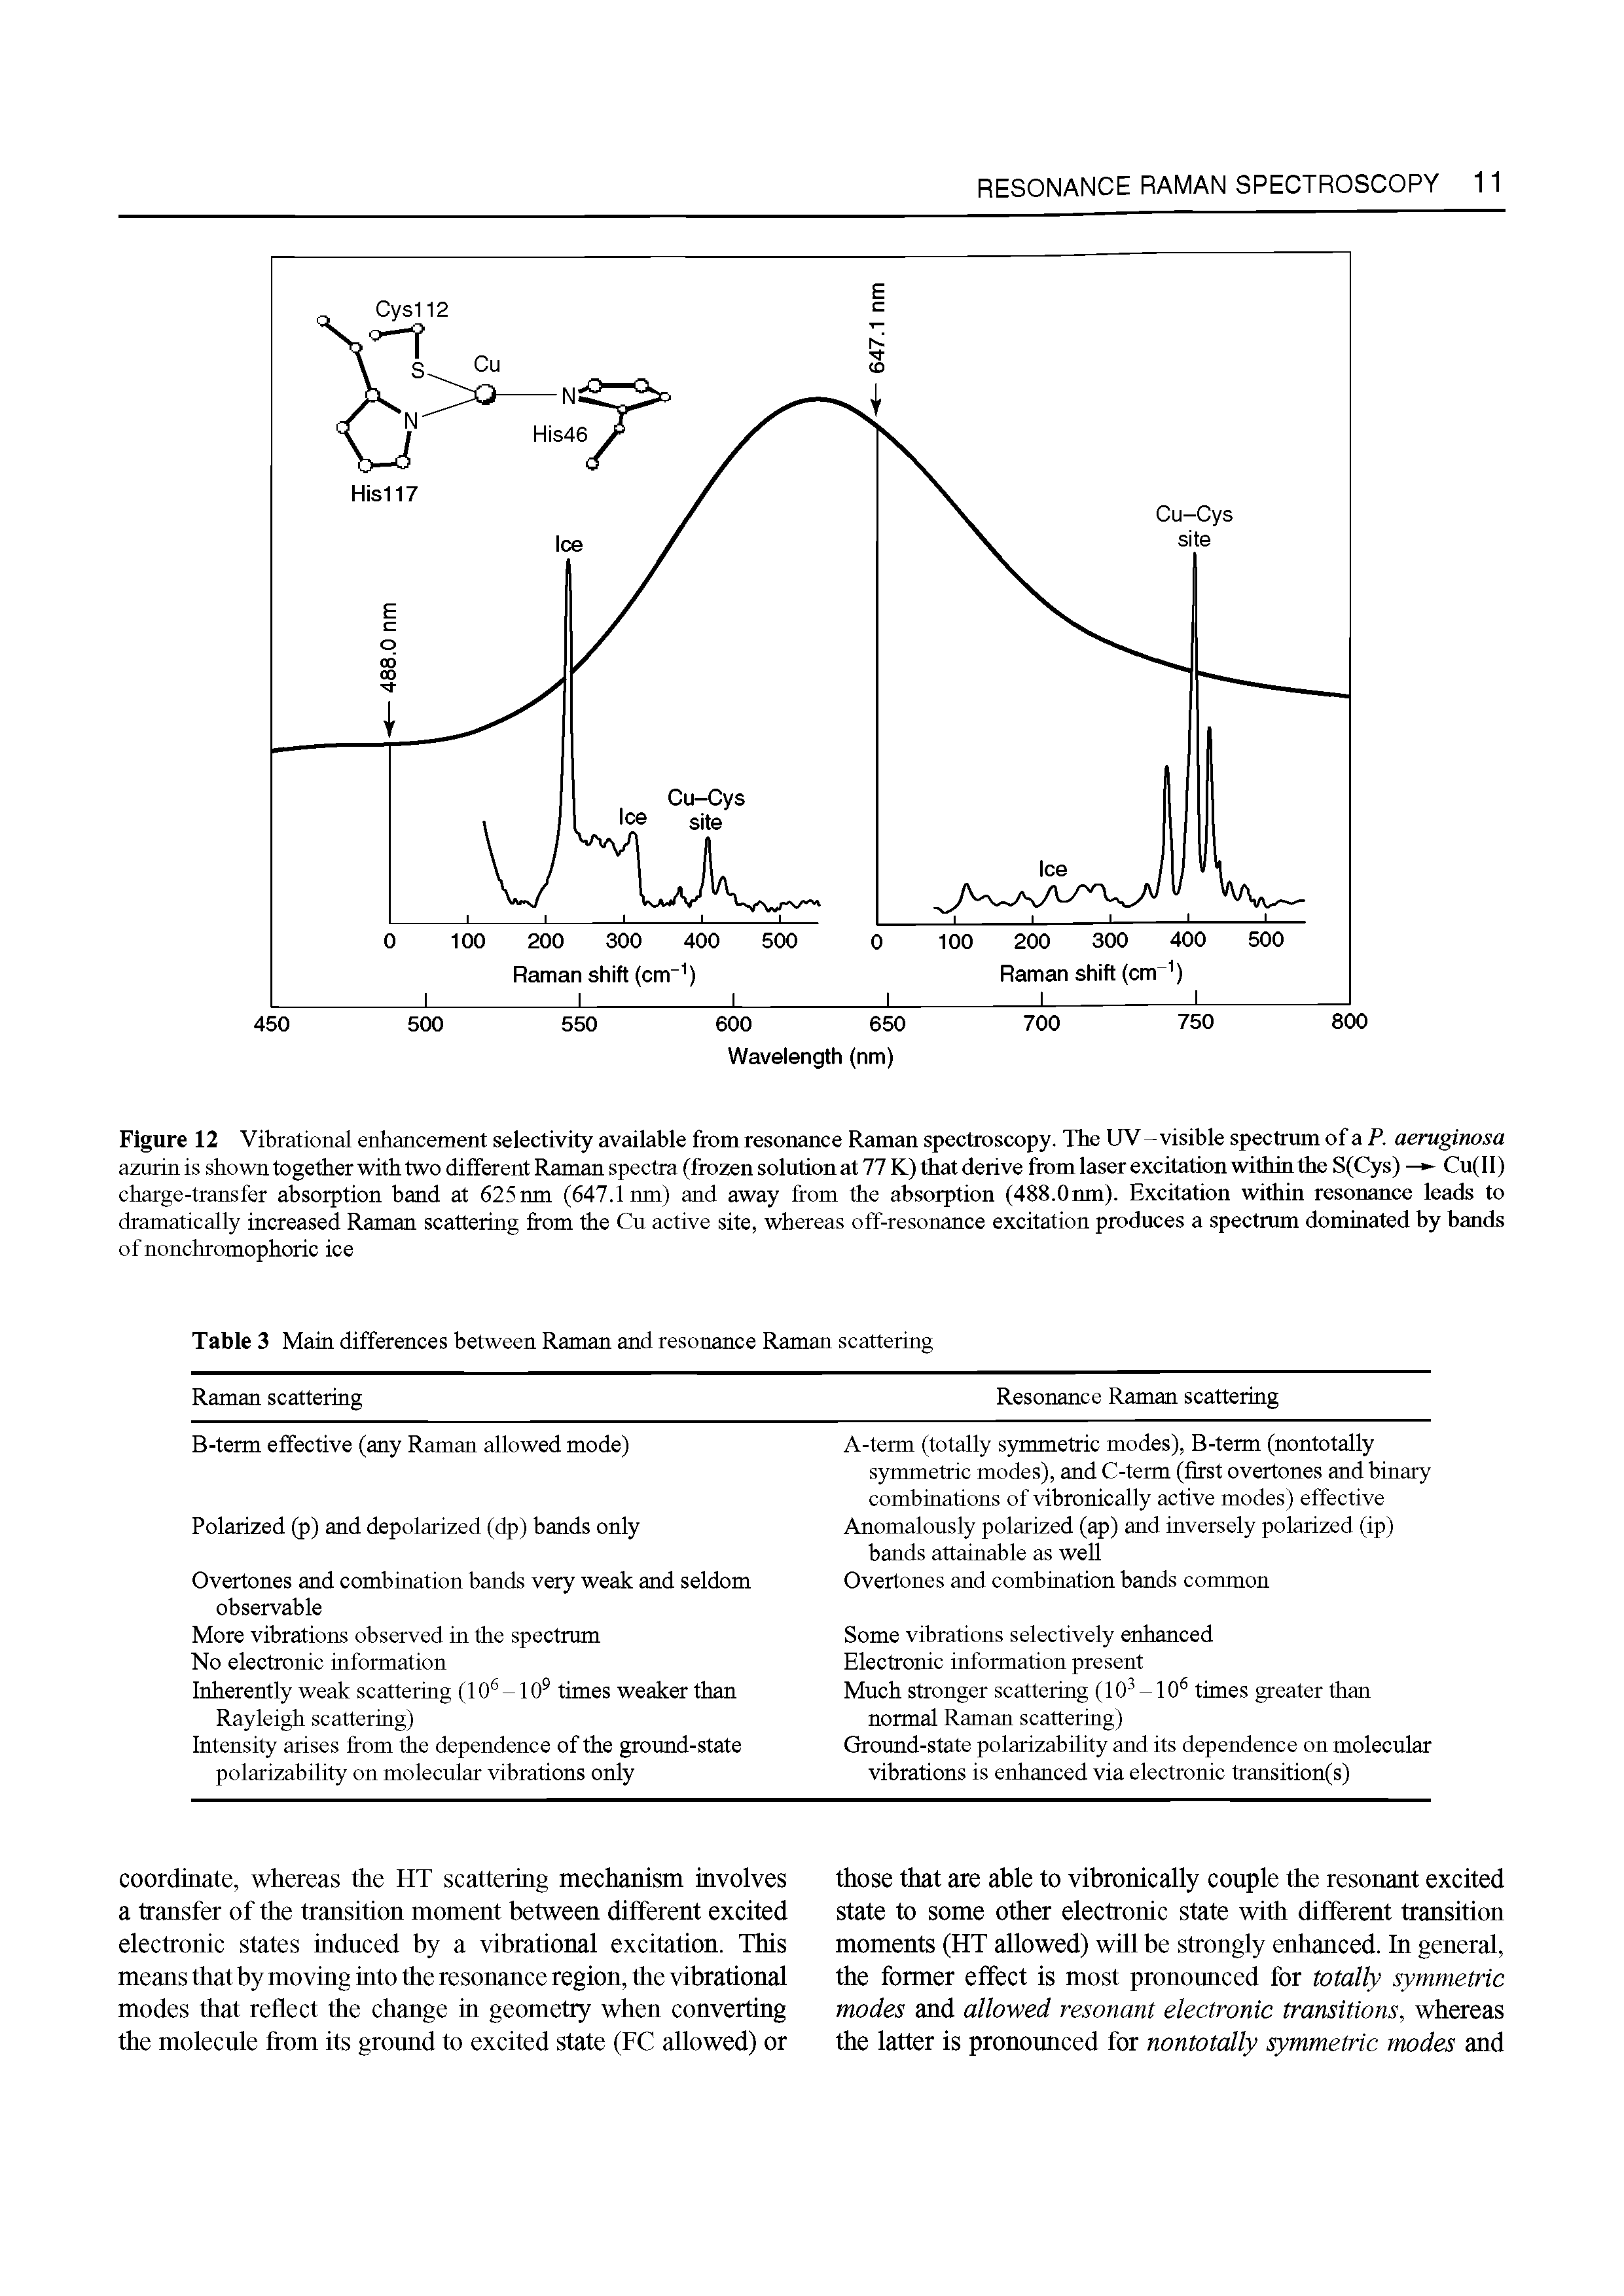 Figure 12 Vibrational enhancement selectivity available from resonance Raman spectroscopy. The UV-visible spectrum of a P. aeruginosa azurinis shown together with two different Raman spectra (frozen solution at 77 K) that derive from laser excitation within the S(Cys) — Cu(II) charge-transfer absorption band at 625run (647.1 nm) and away from the absorption (488.Onm). Excitation within resonance leads to dramatically increased Raman scattering from the Cu active site, whereas off-resonance excitation produces a spectrum dominated by bands of nonchromophoric ice...